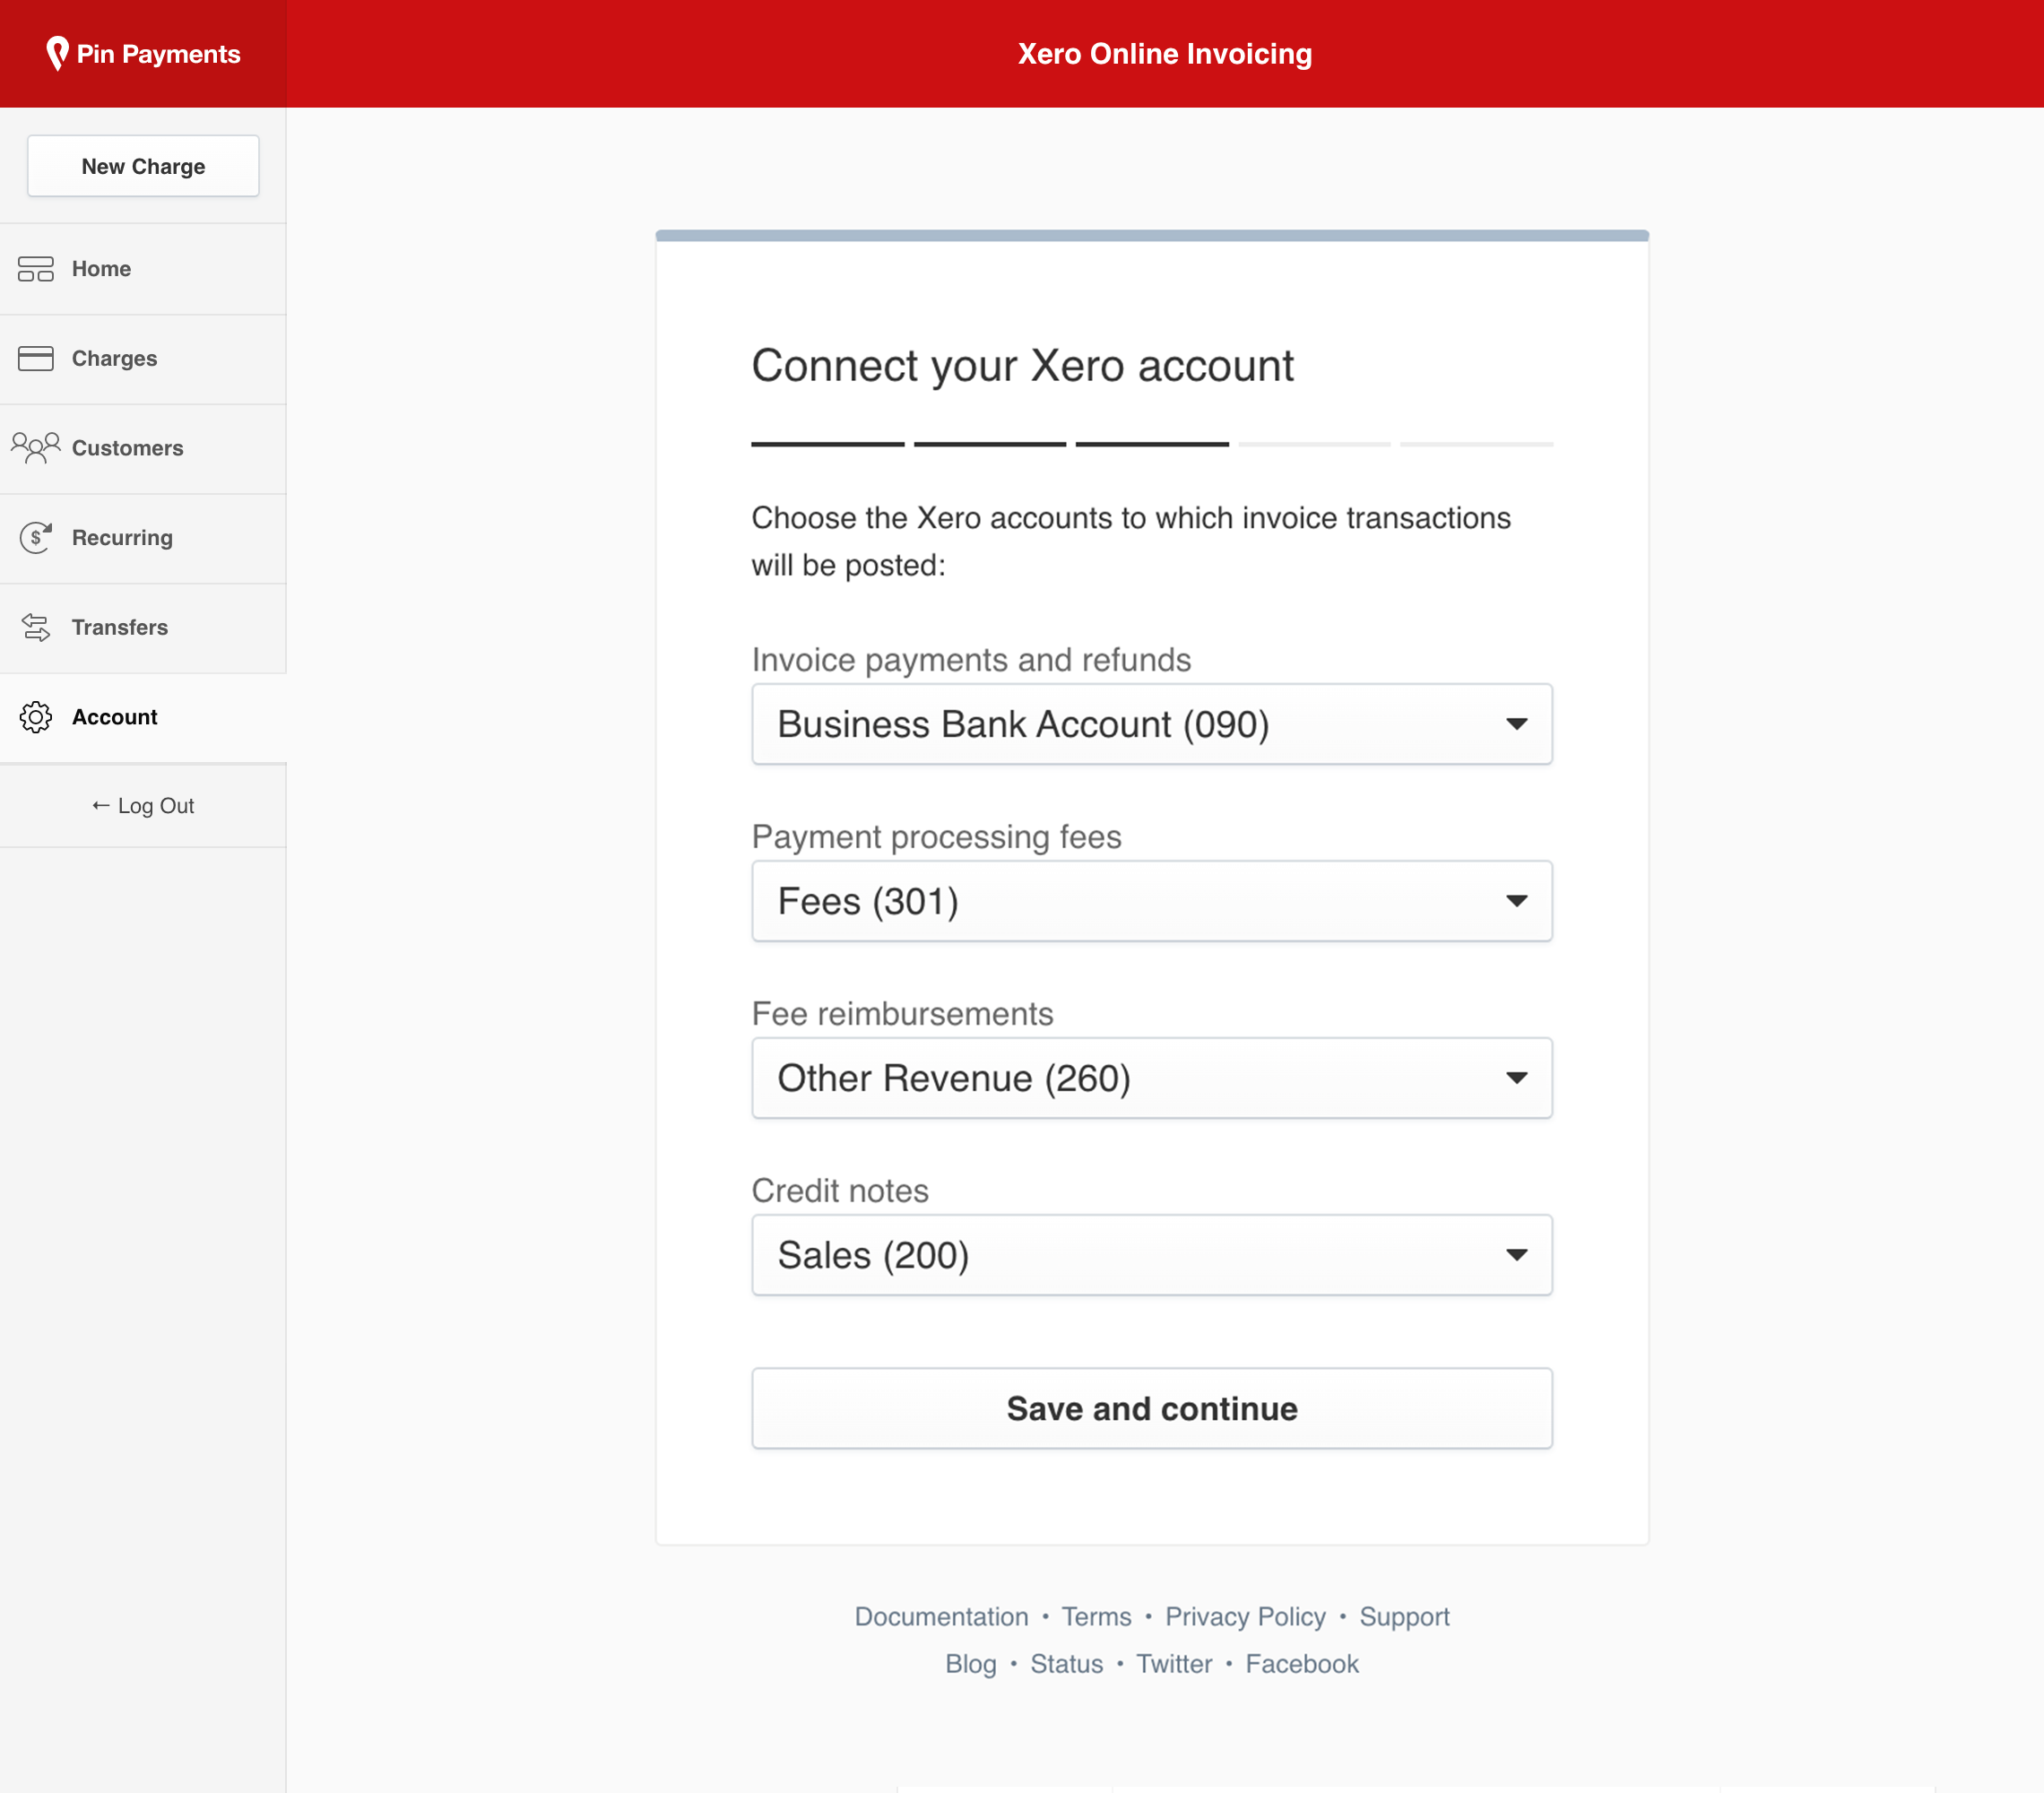 Xero Online Invoicing settings under Dashboard account